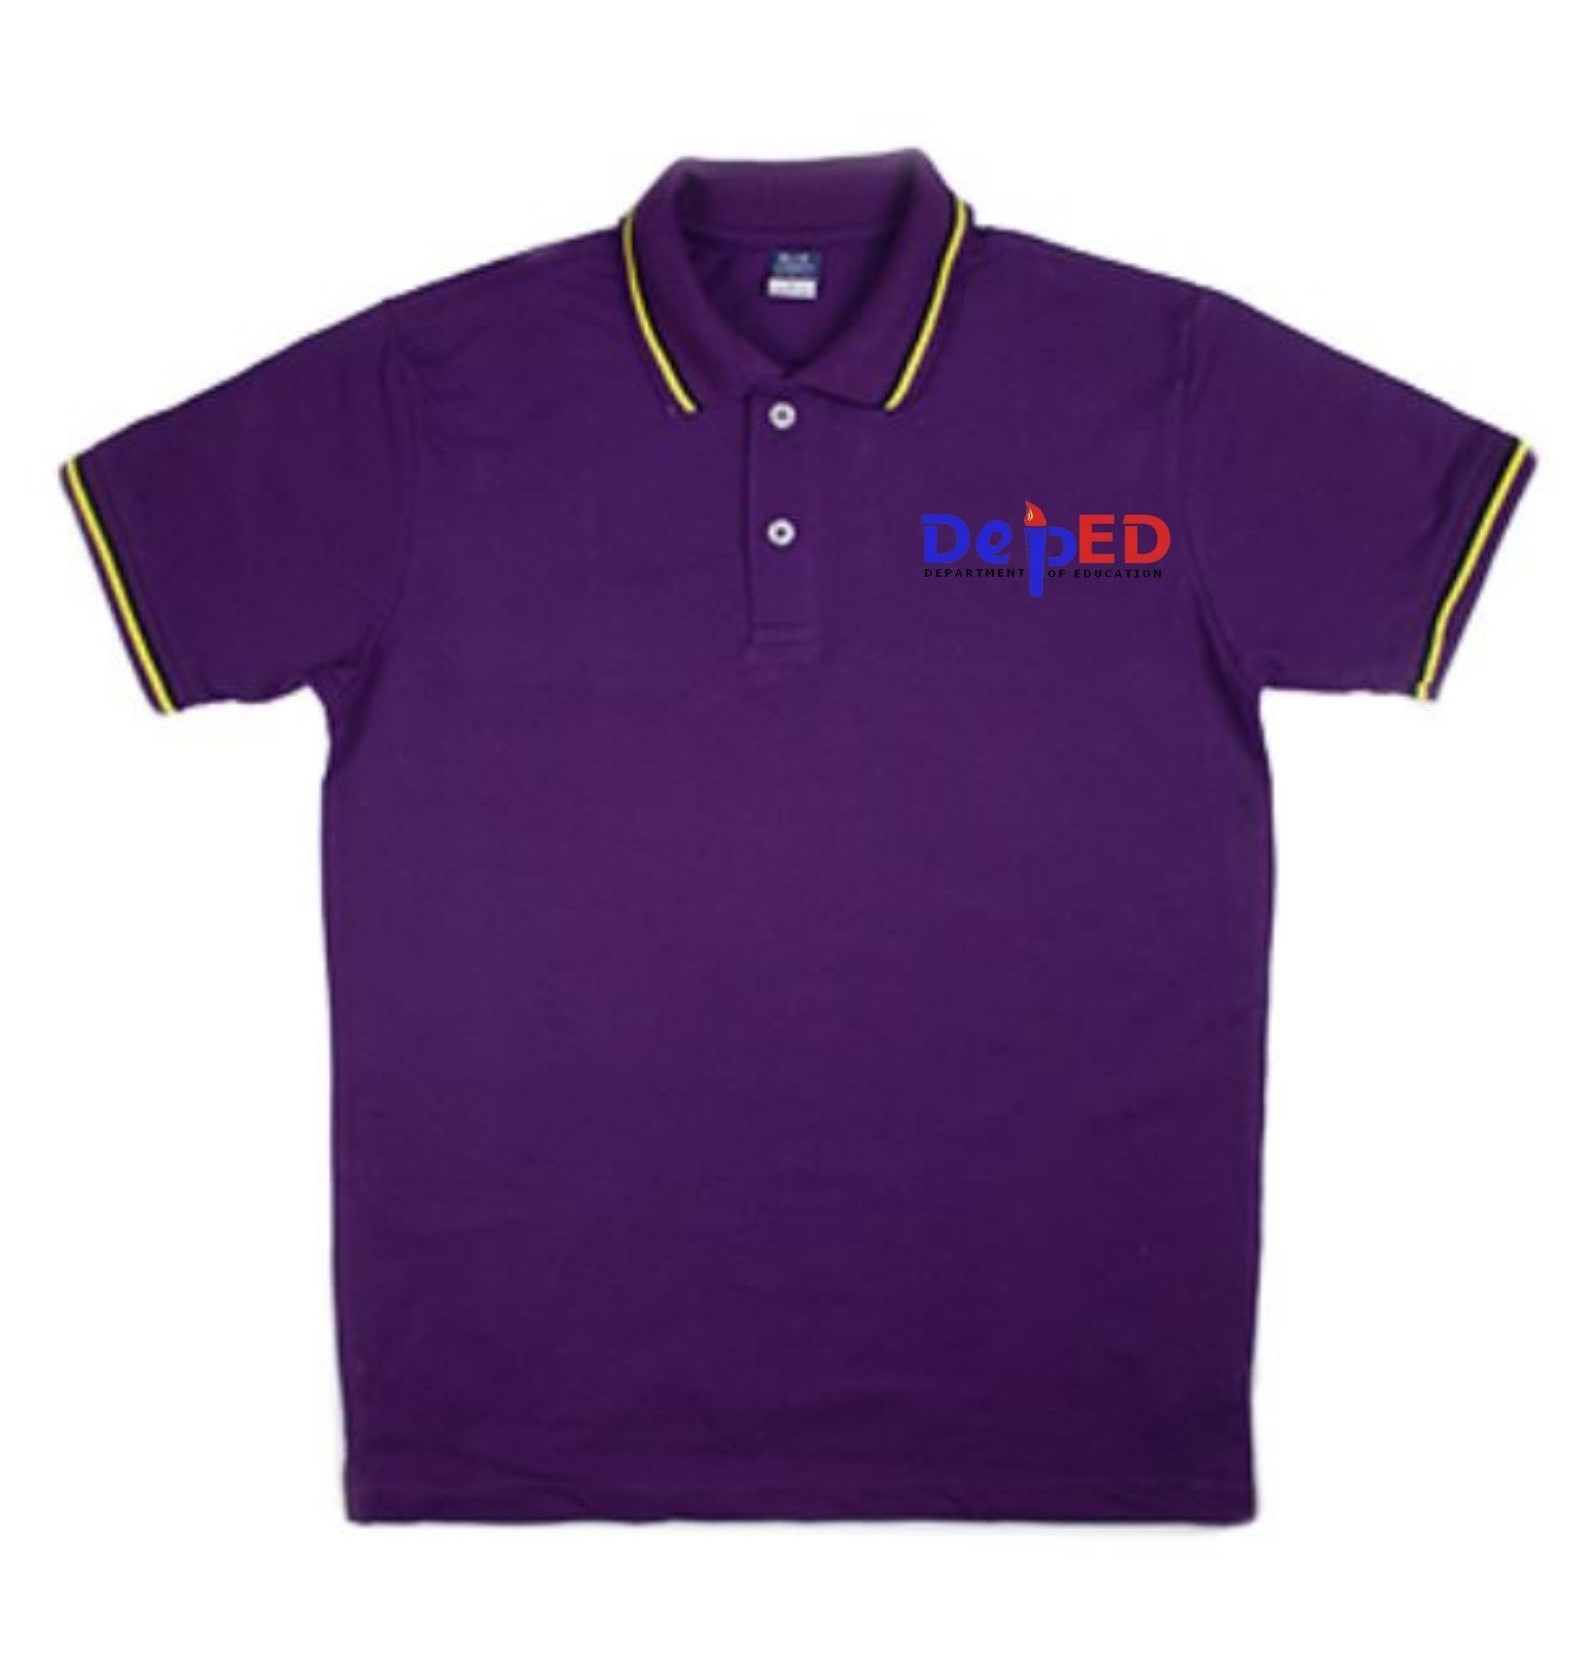 Violet Polo Shirt with DepEd EmbroideredLogo Wash Day Uniform Friday ...